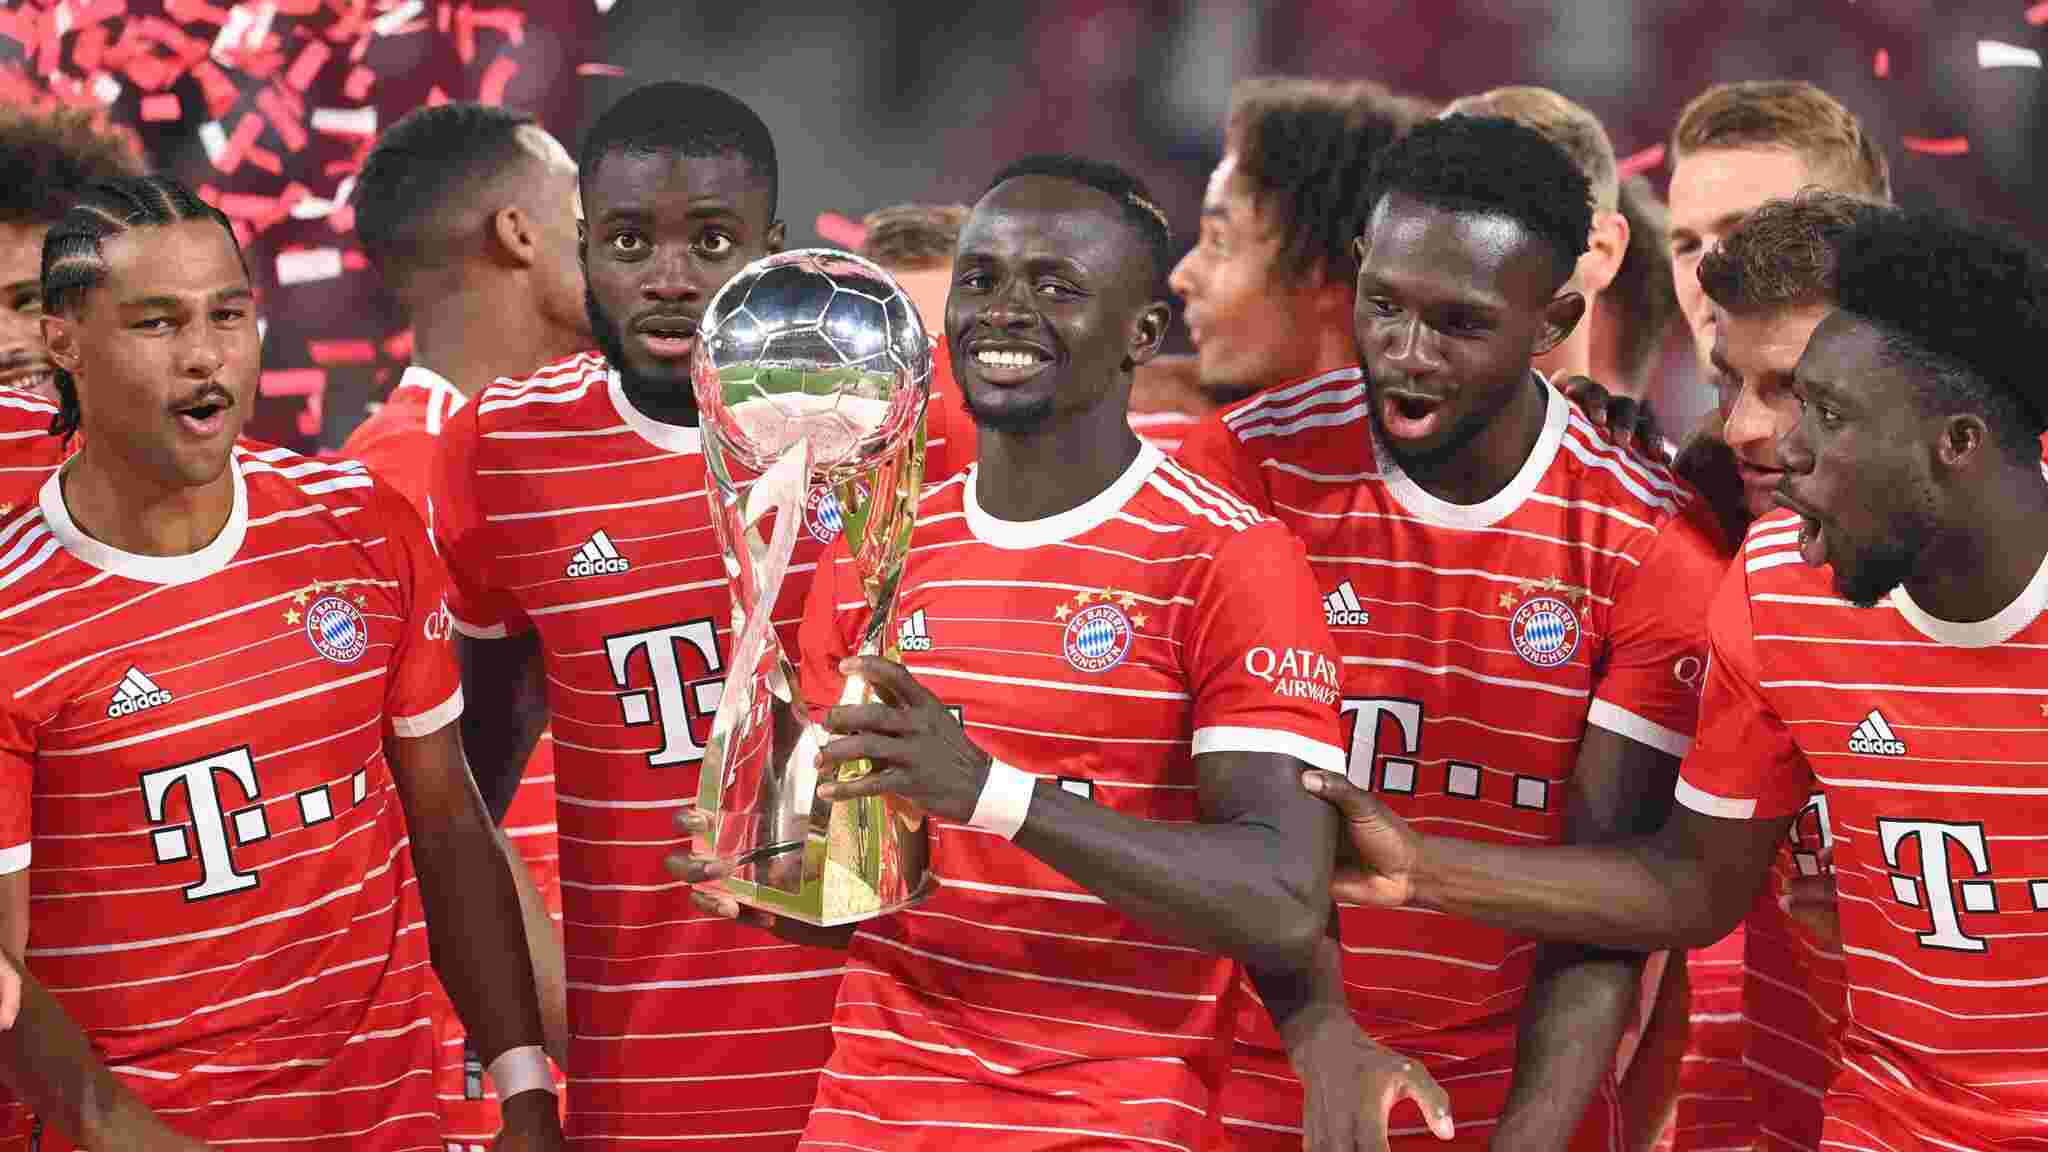 Eintracht Frankfurt vs Bayern Munich LIVE in Bundesliga: Preview, Squad News, Dream11 Prediction and FRK vs BAY live streaming, Follow for live updates